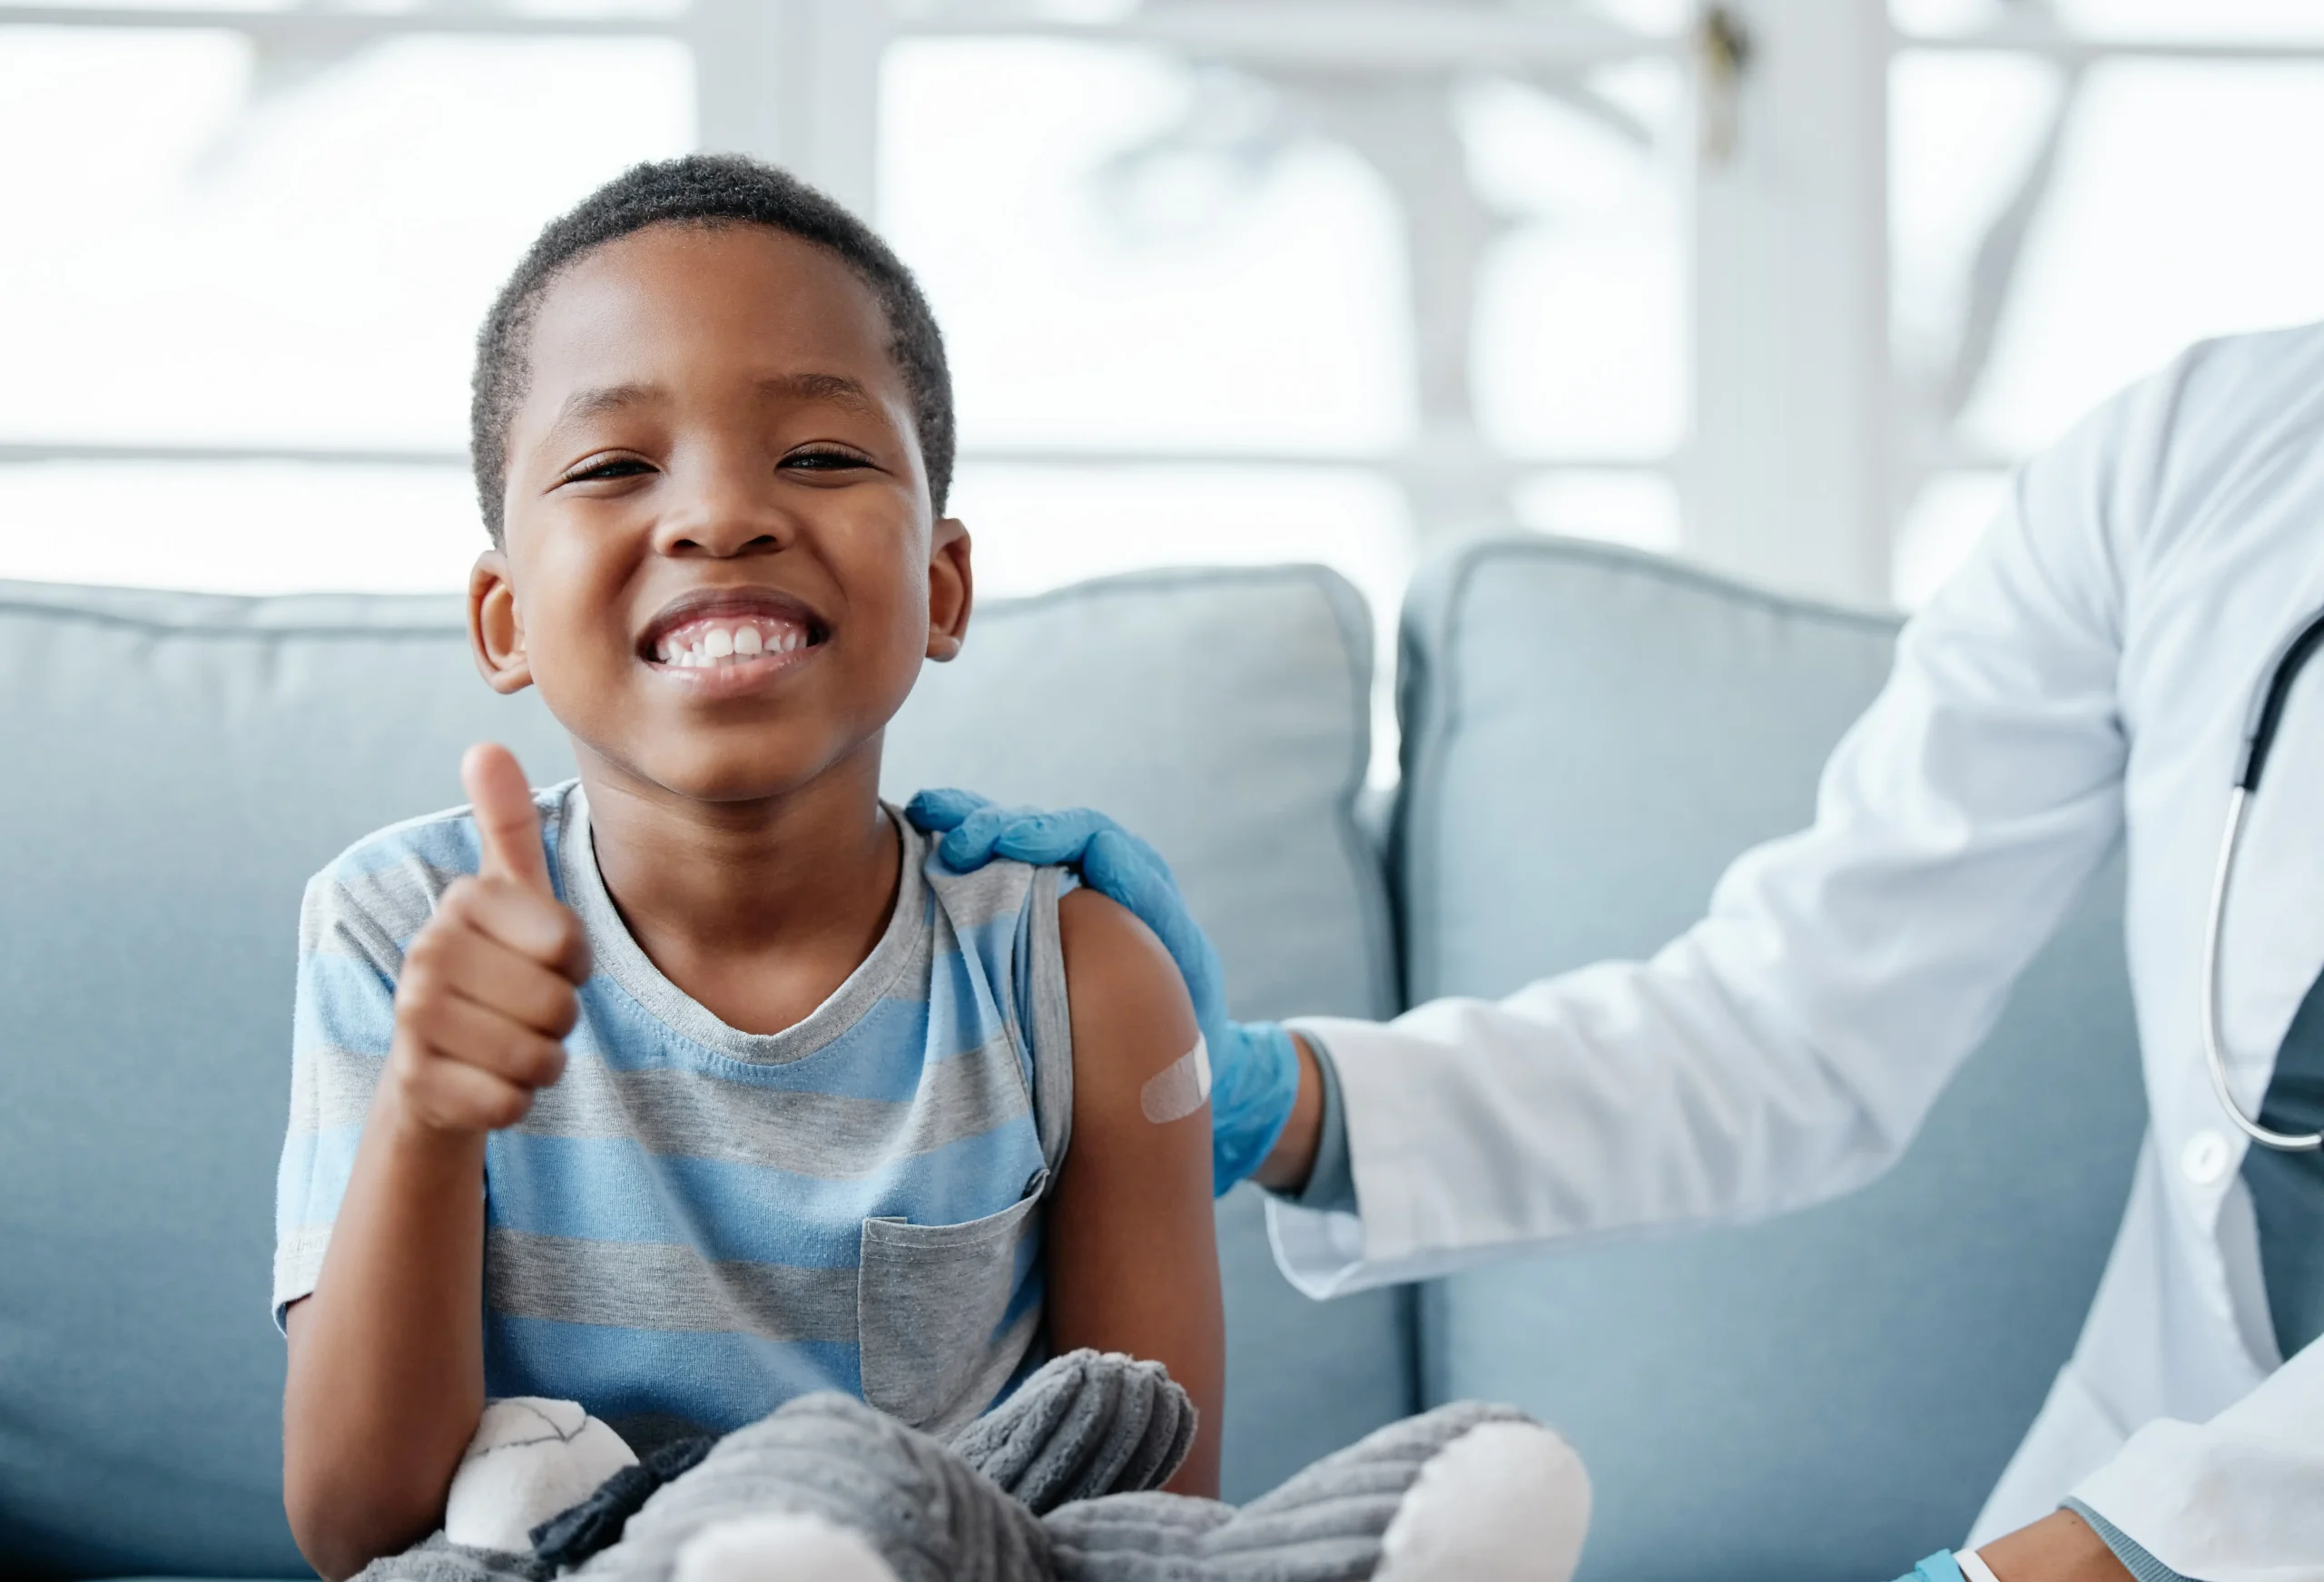 Young child at the doctors office smiling during consultation